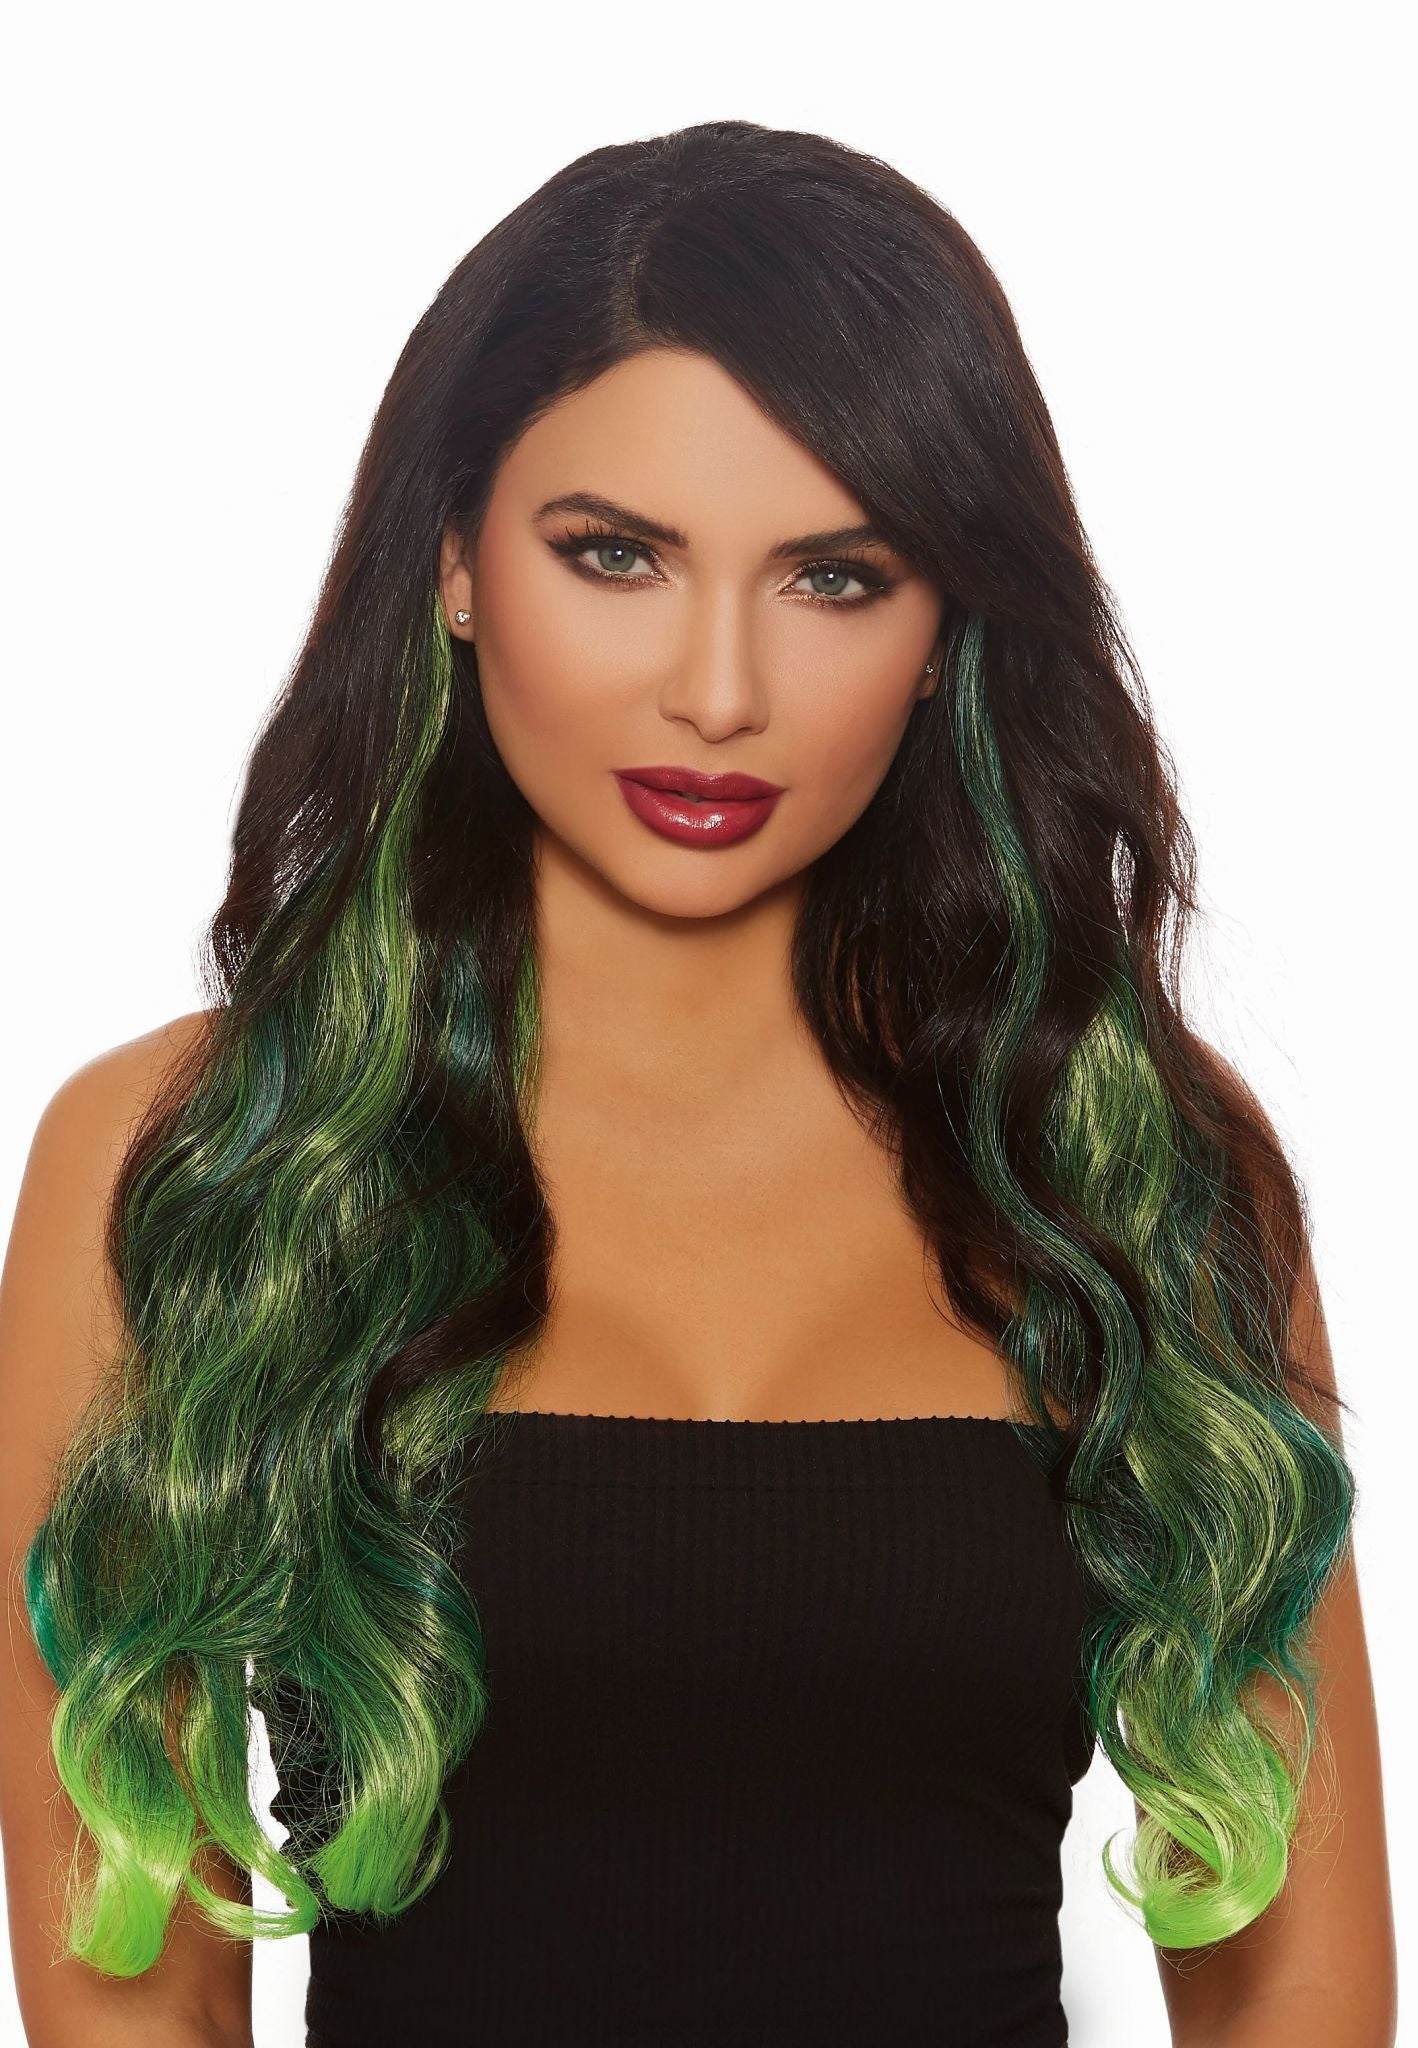 A woman wearing green hair extensions.